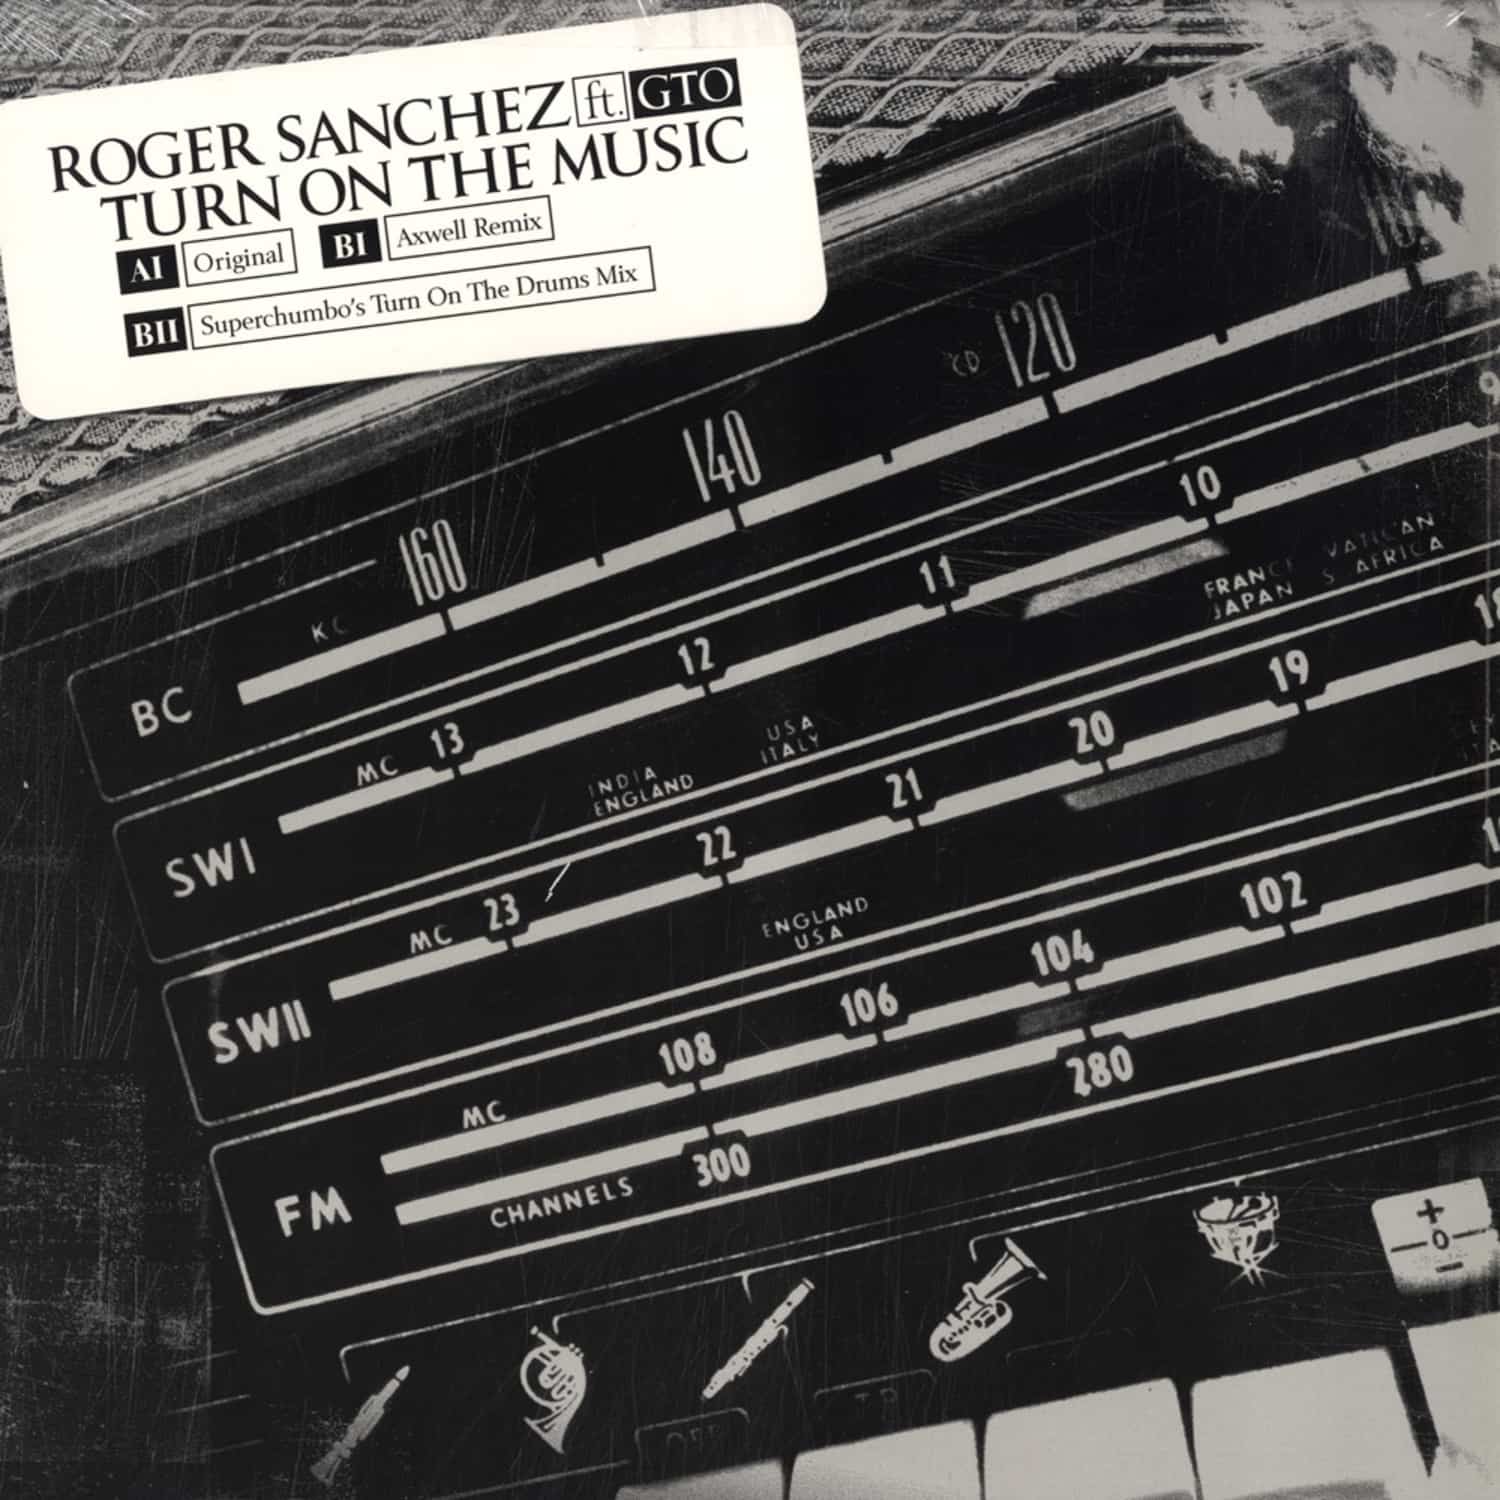 Rogers Sanchez - TURN UP THE MUSIC